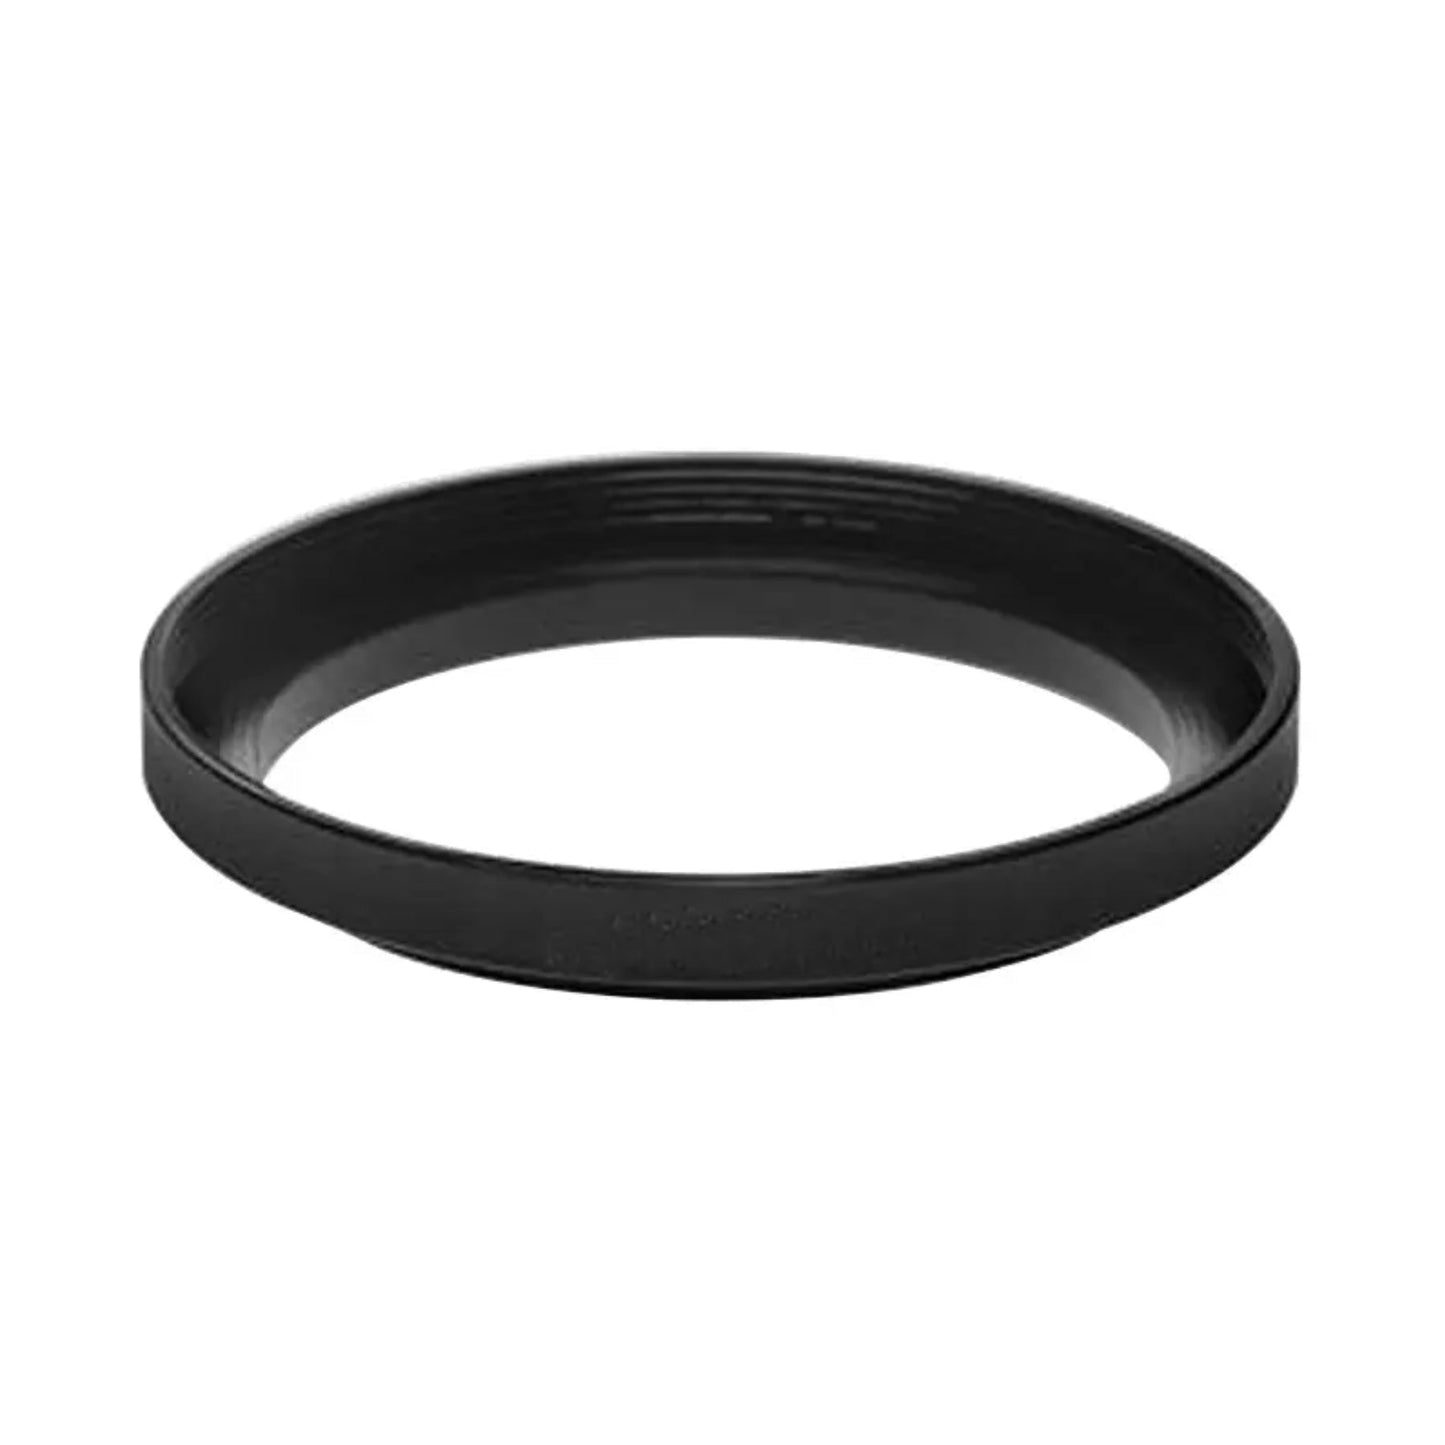 Hire Step Up Ring - 52 to 58mm at Topic Rentals